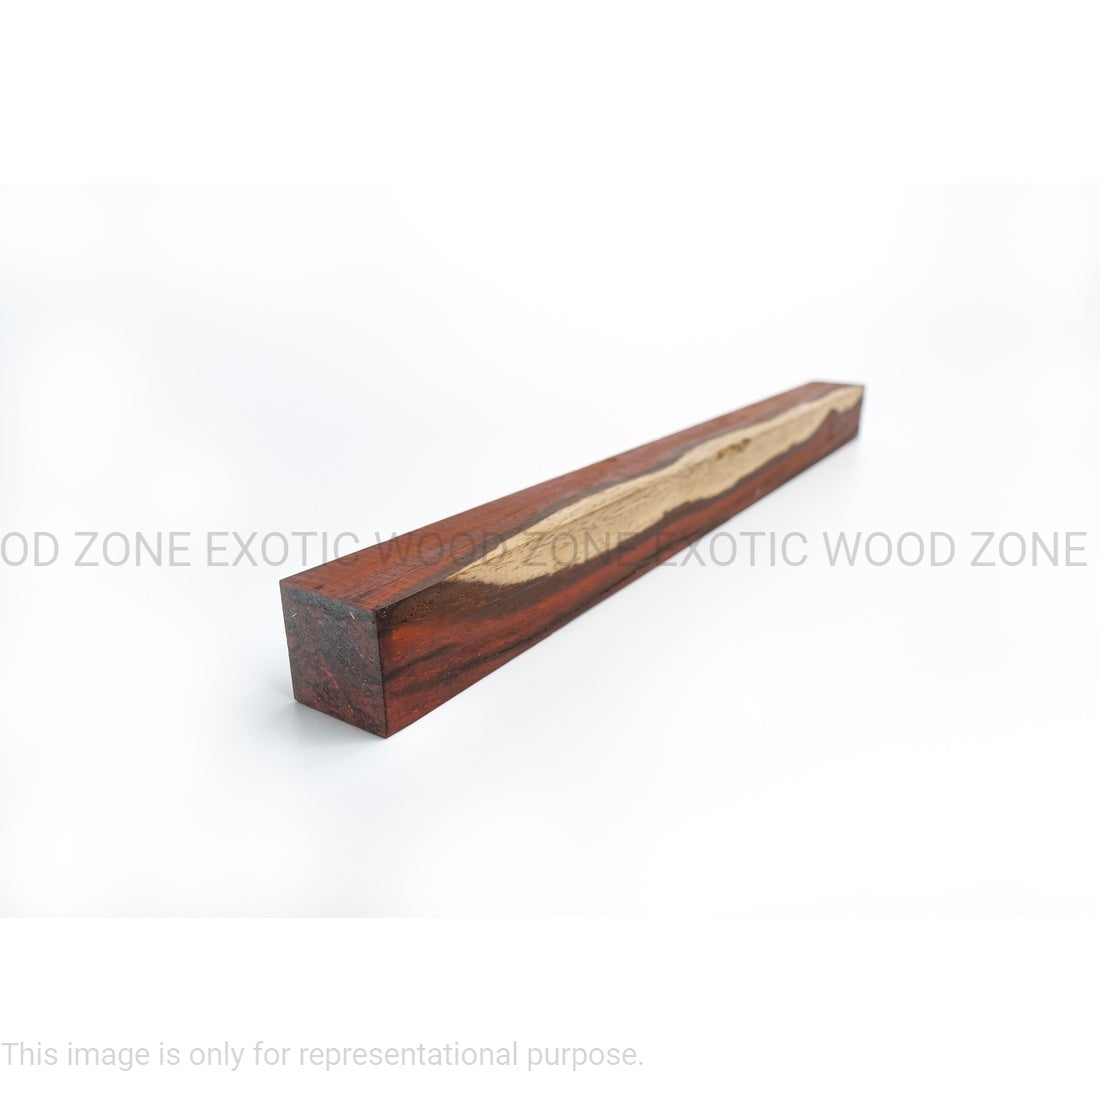 Cocobolo Hobby Wood/ Turning Wood Blanks 1 x 1 x 12 inches - Exotic Wood Zone - Buy online Across USA 